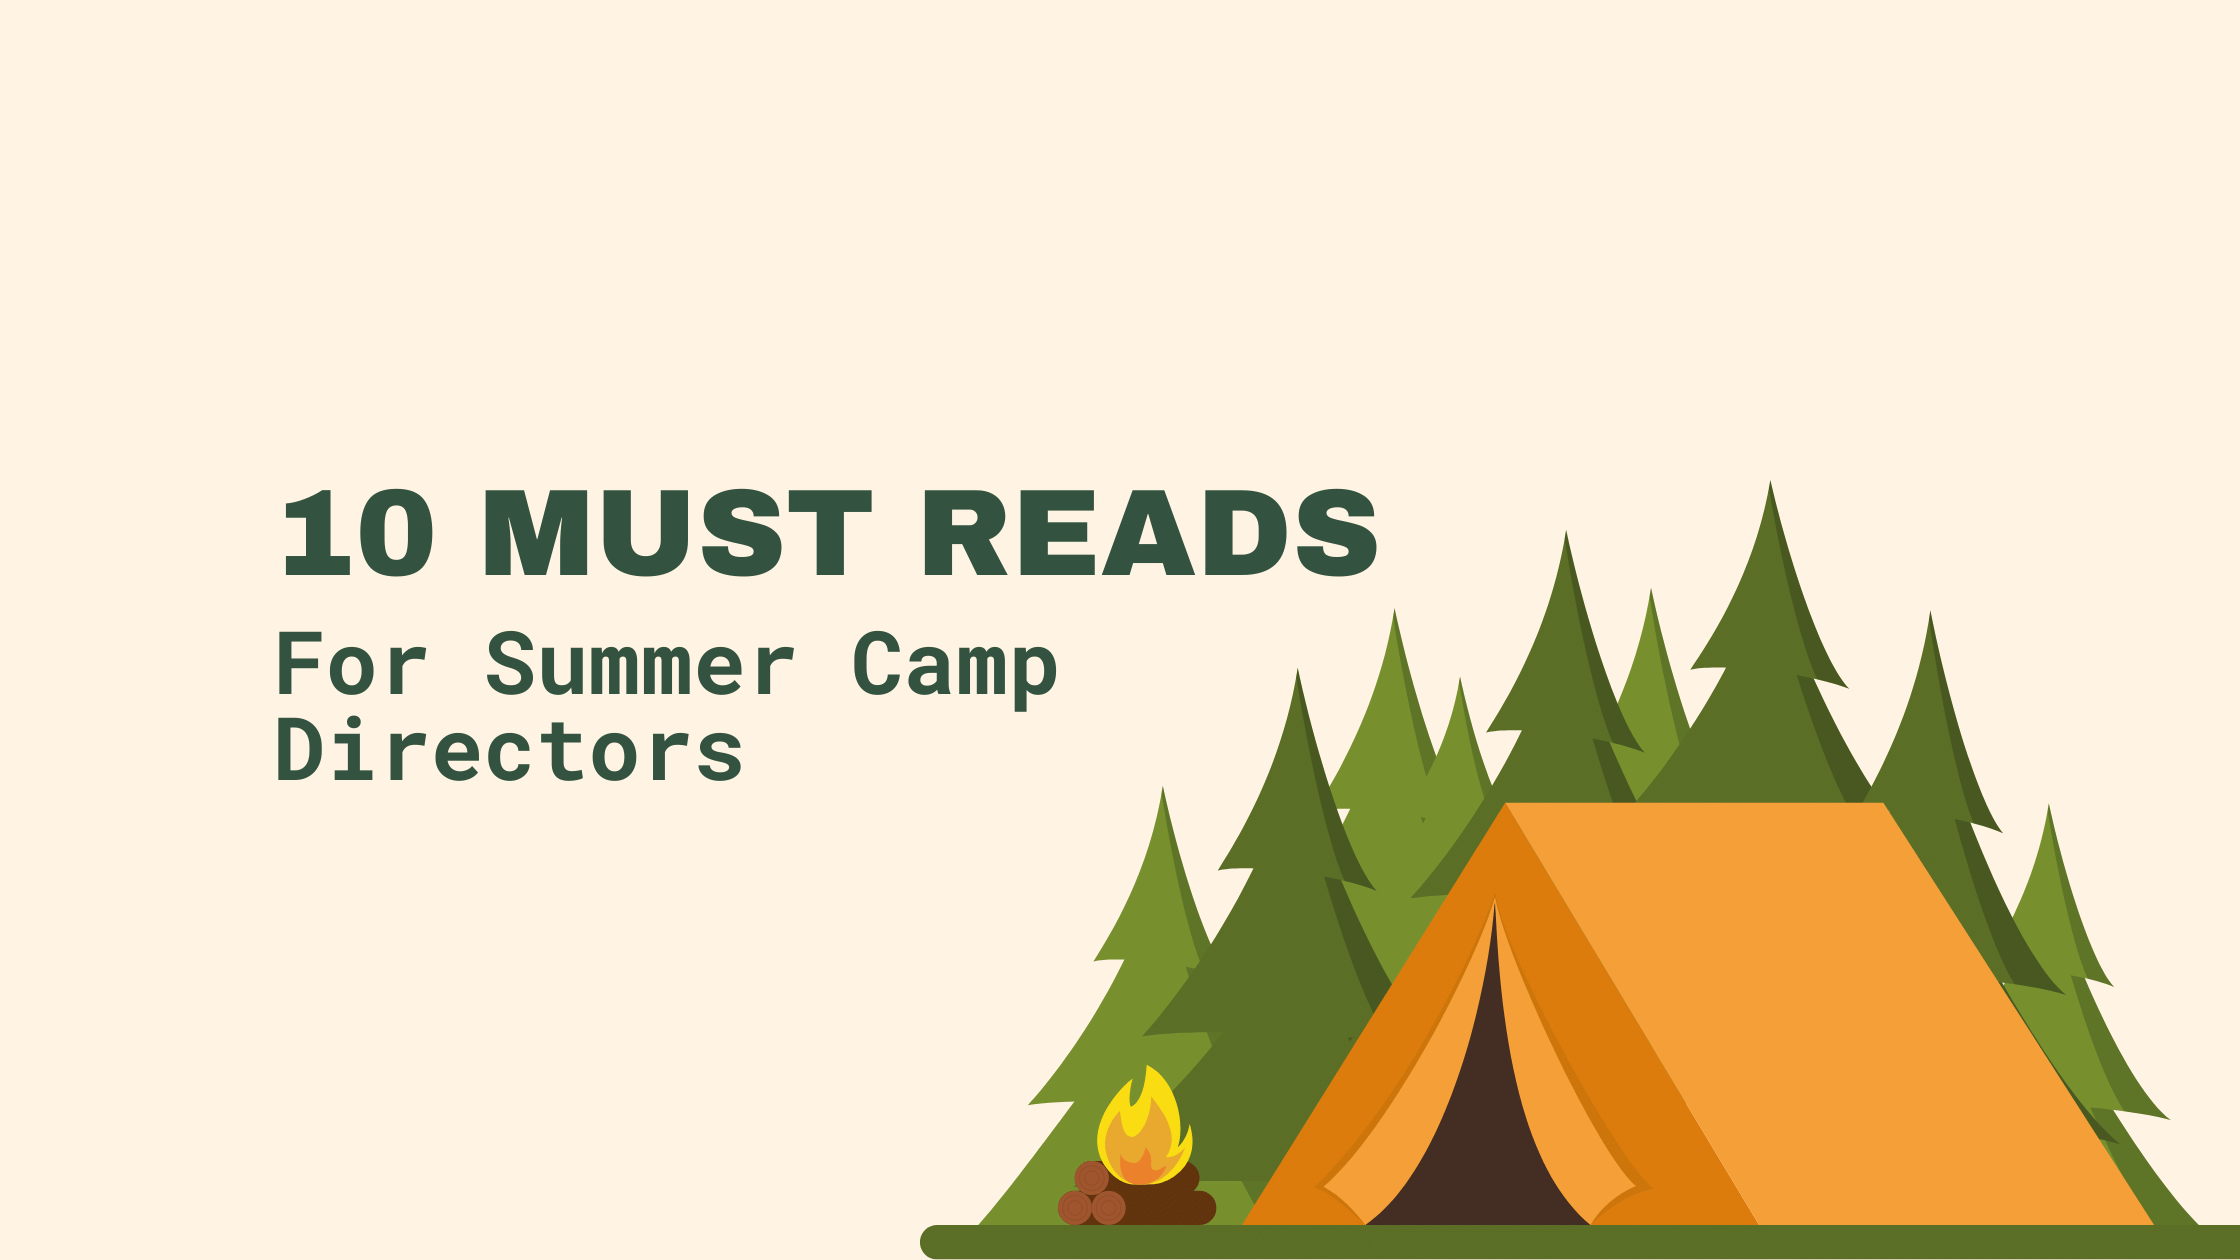 Camp Director's Guide to Gearing Up for Summer Camp